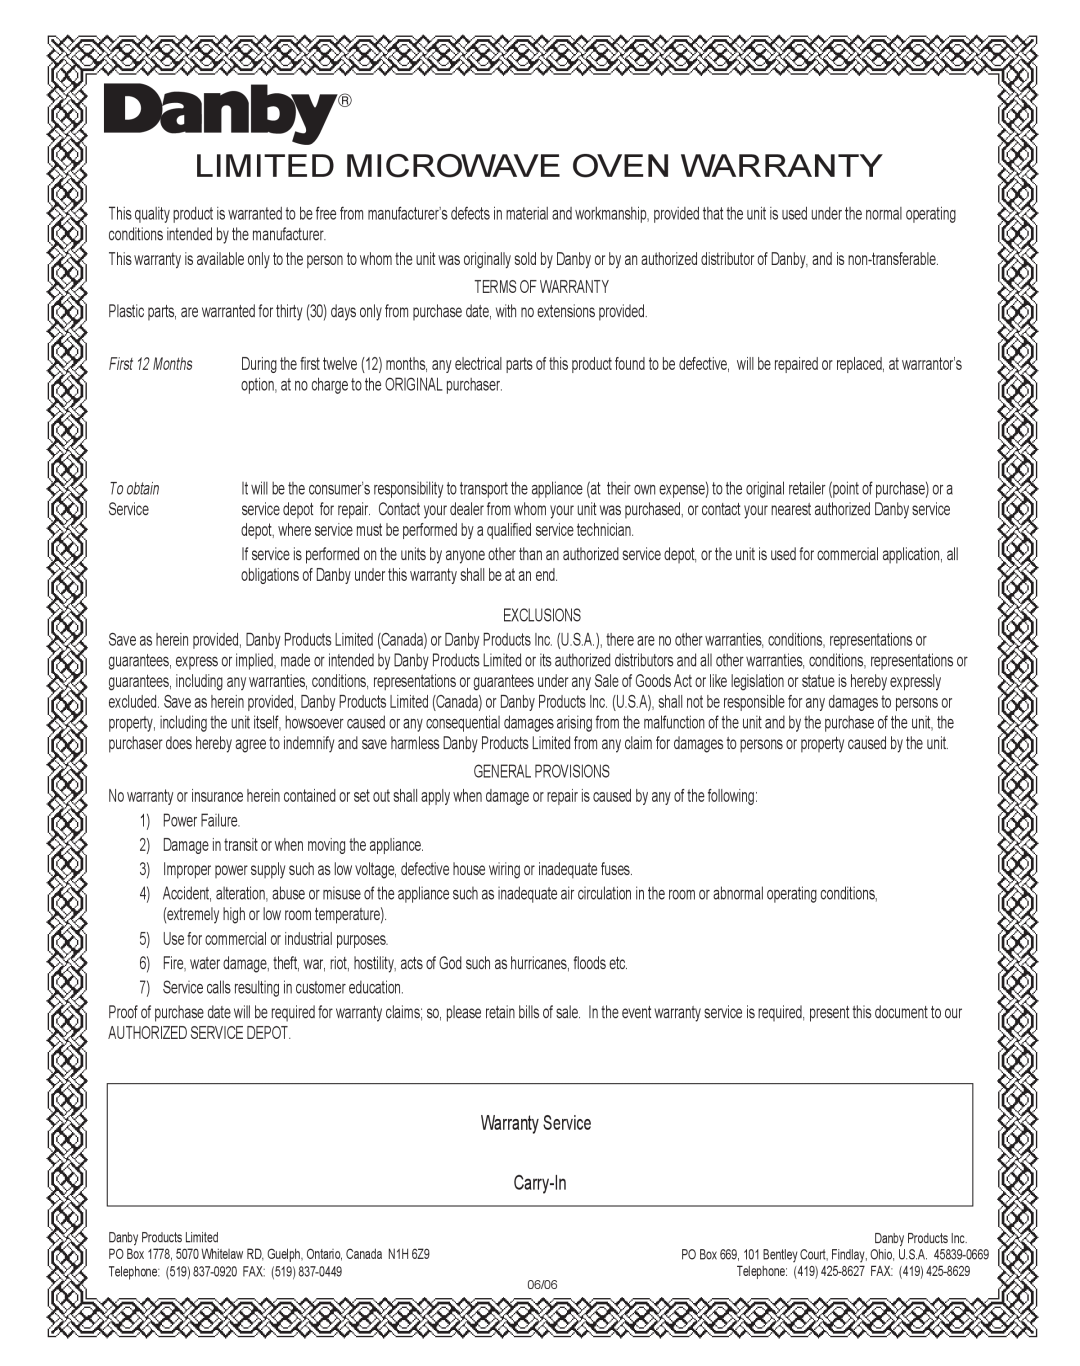 Danby DMW104W owner manual Limited Microwave Oven Warranty, Warranty Service, Carry-In, First 12 Months, To obtain 